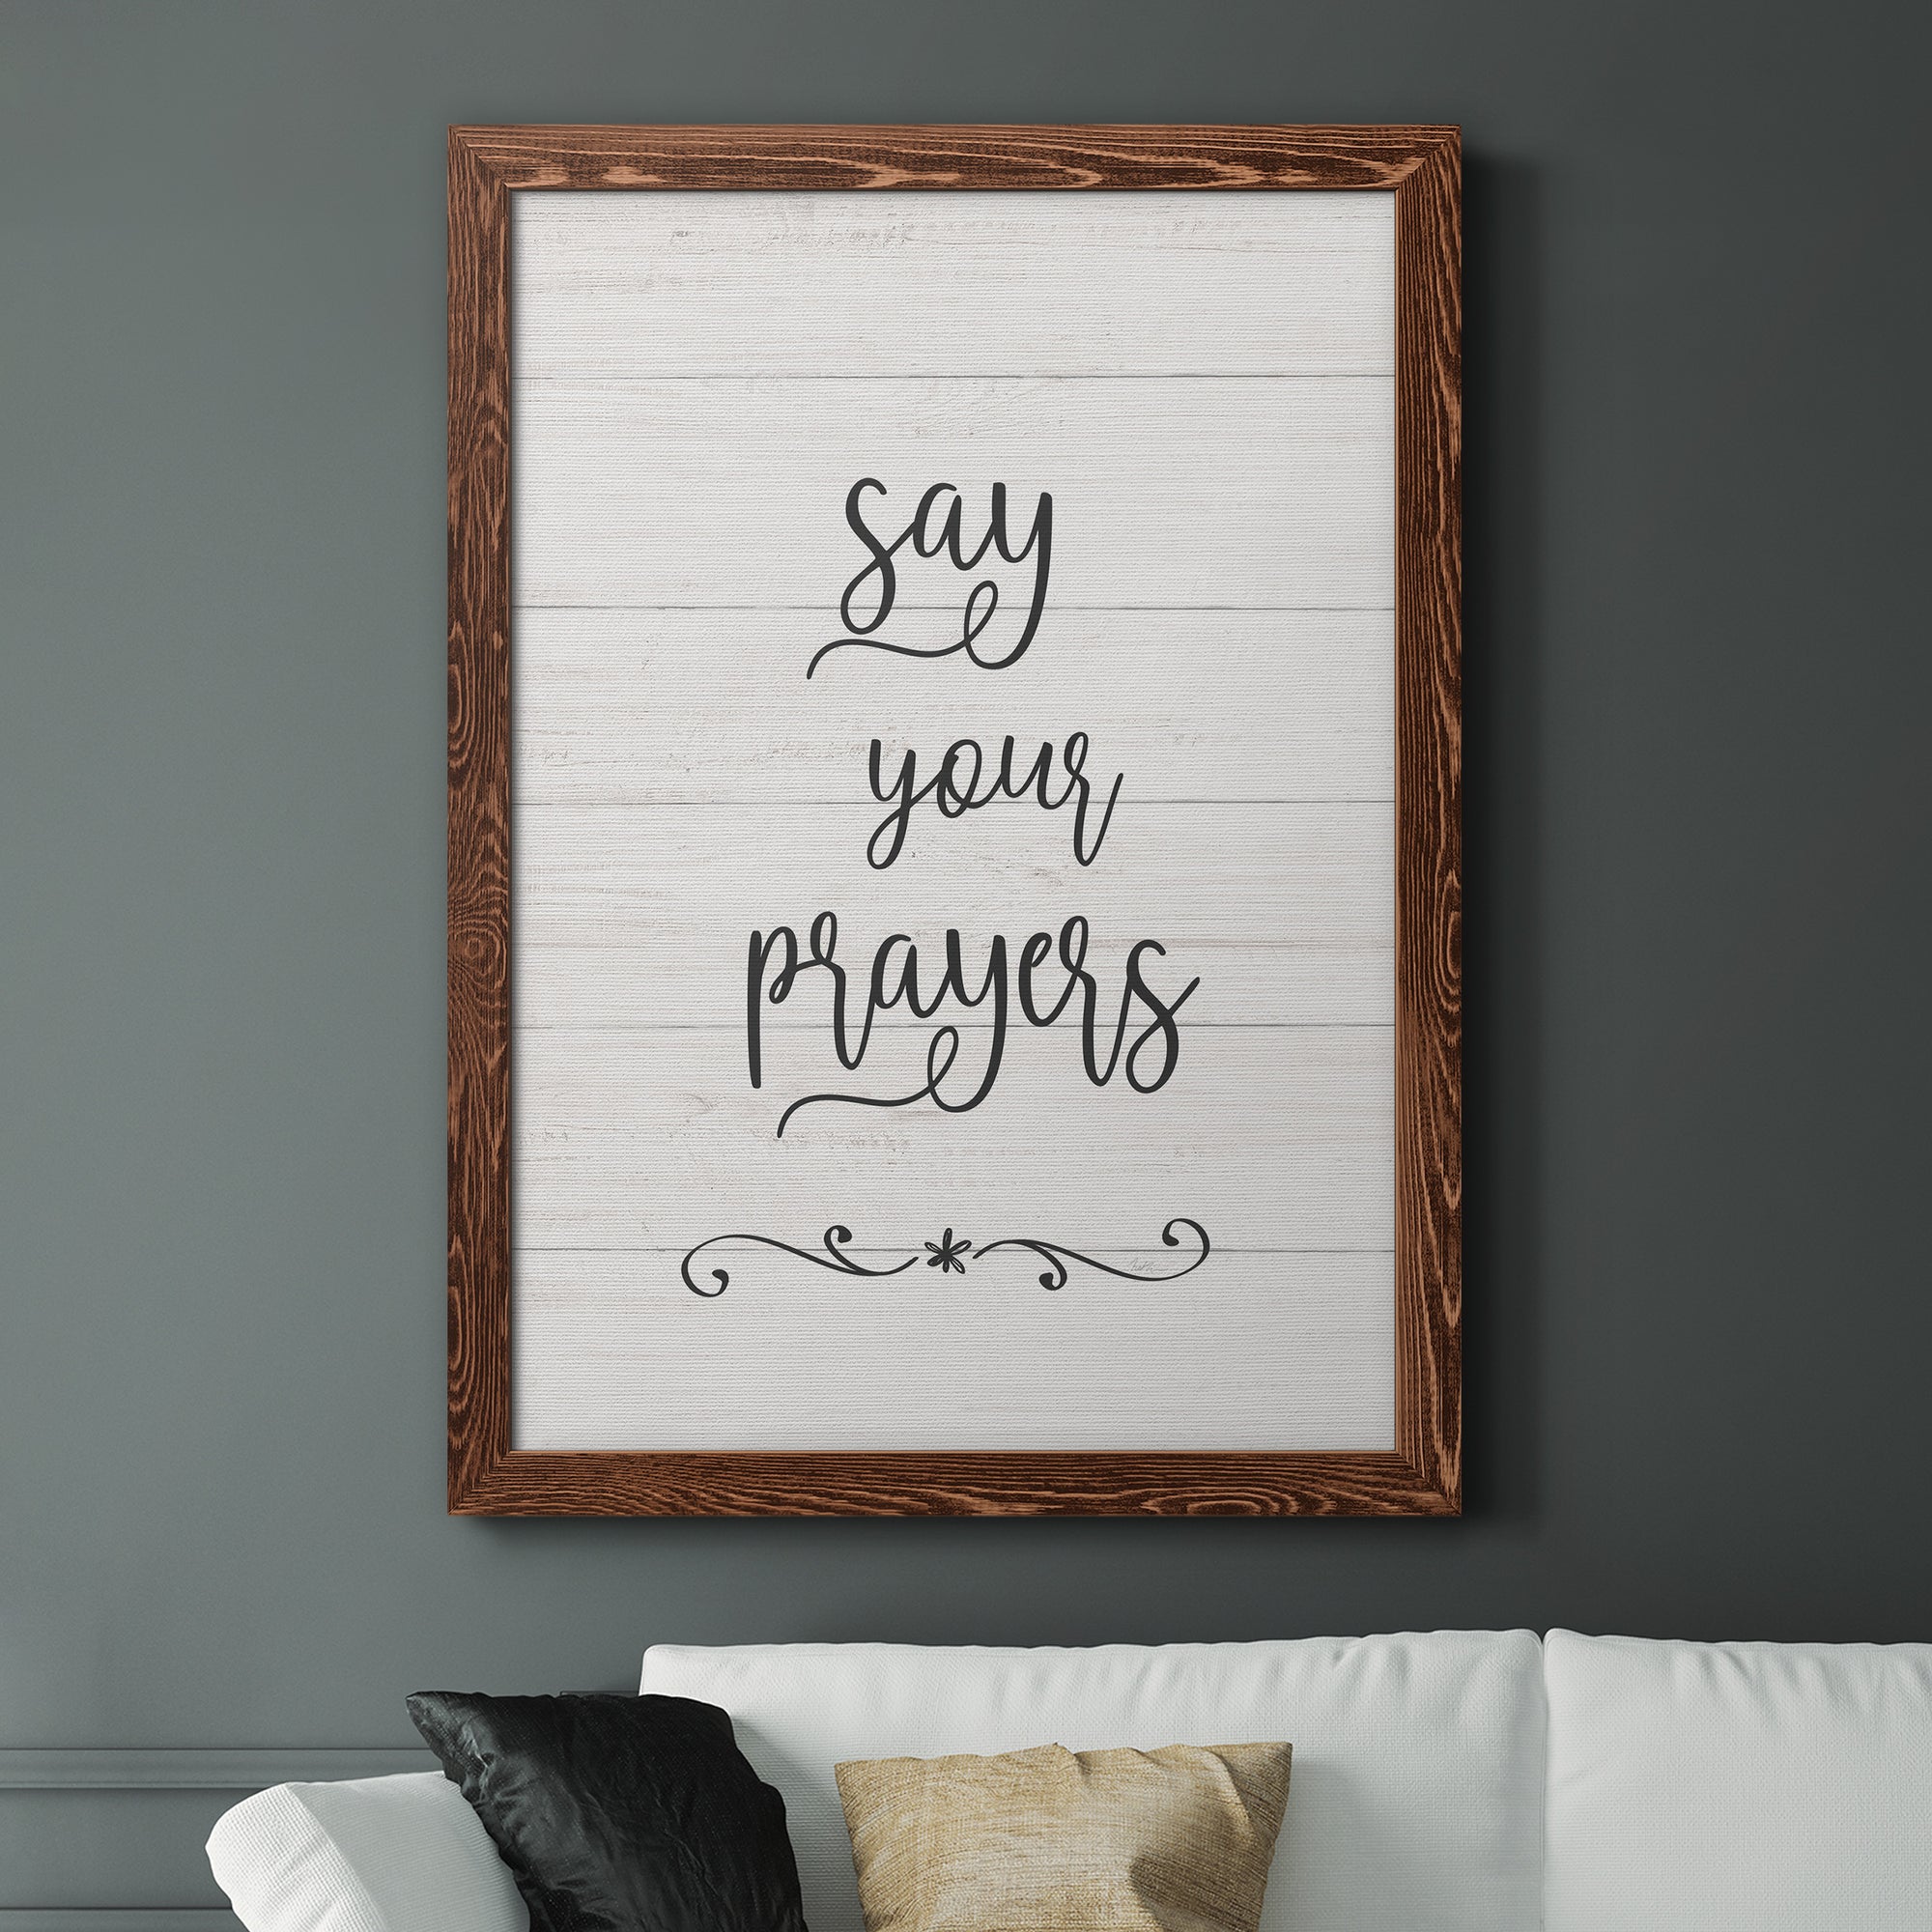 Say Your Prayers - Premium Canvas Framed in Barnwood - Ready to Hang